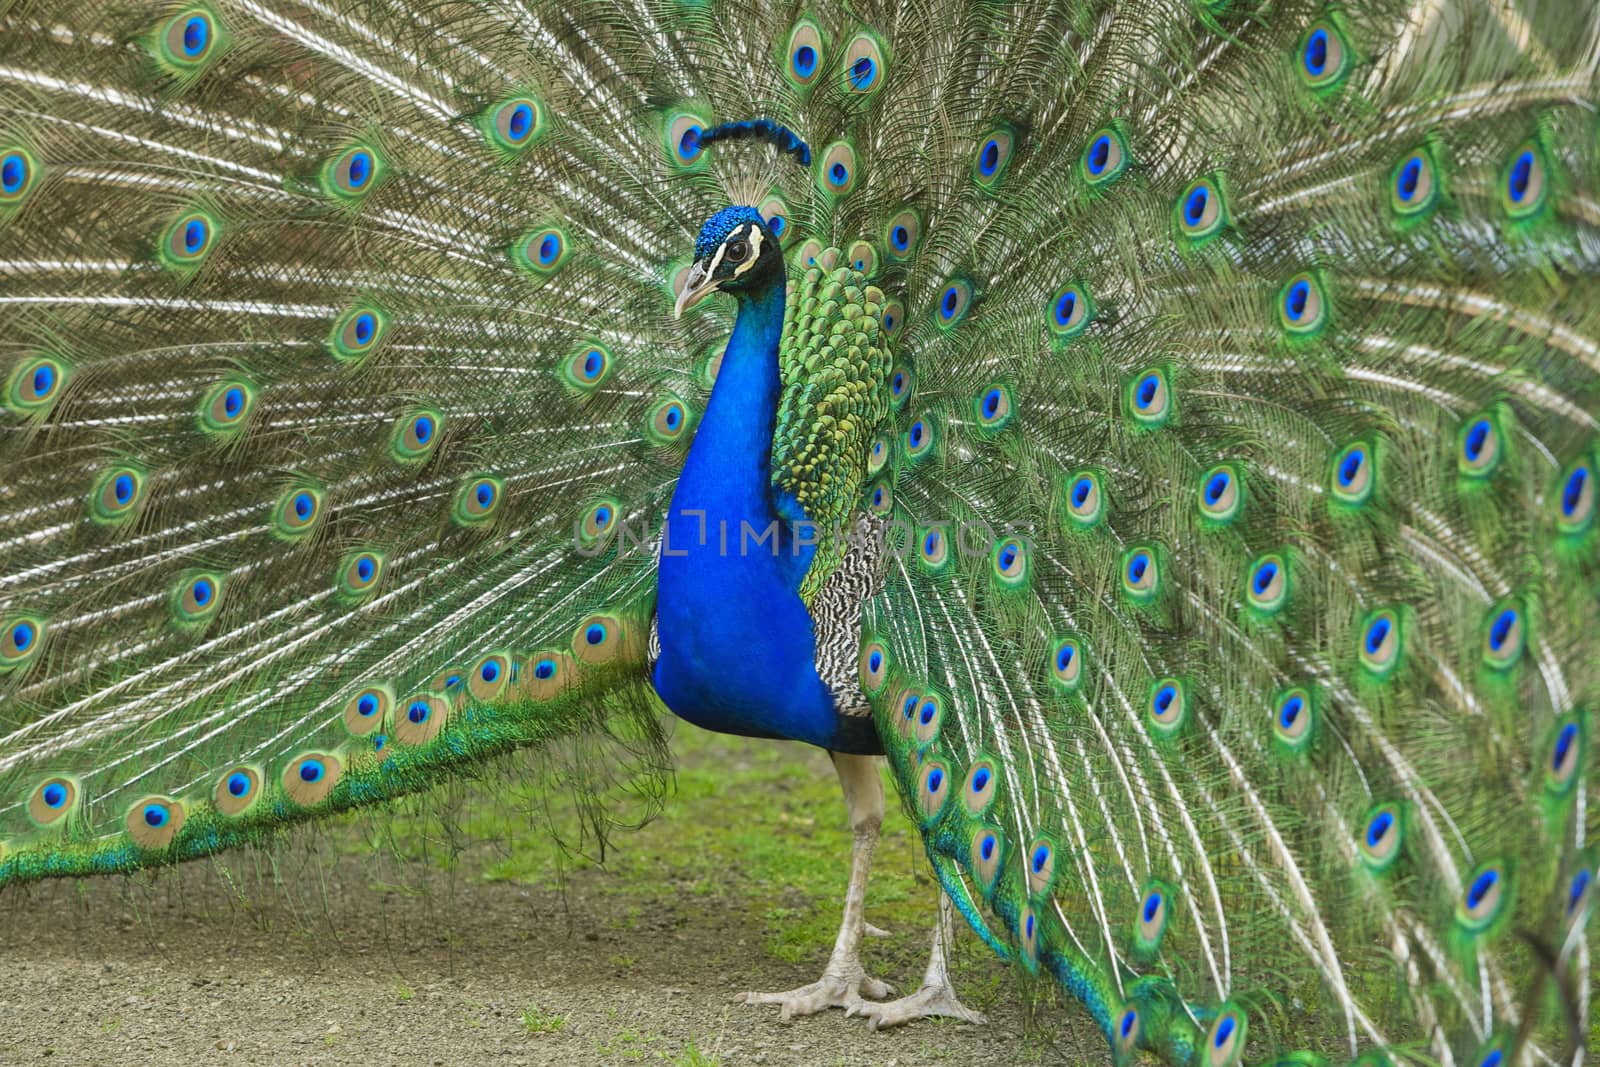 male peacock with tail feathers spread by courtyardpix